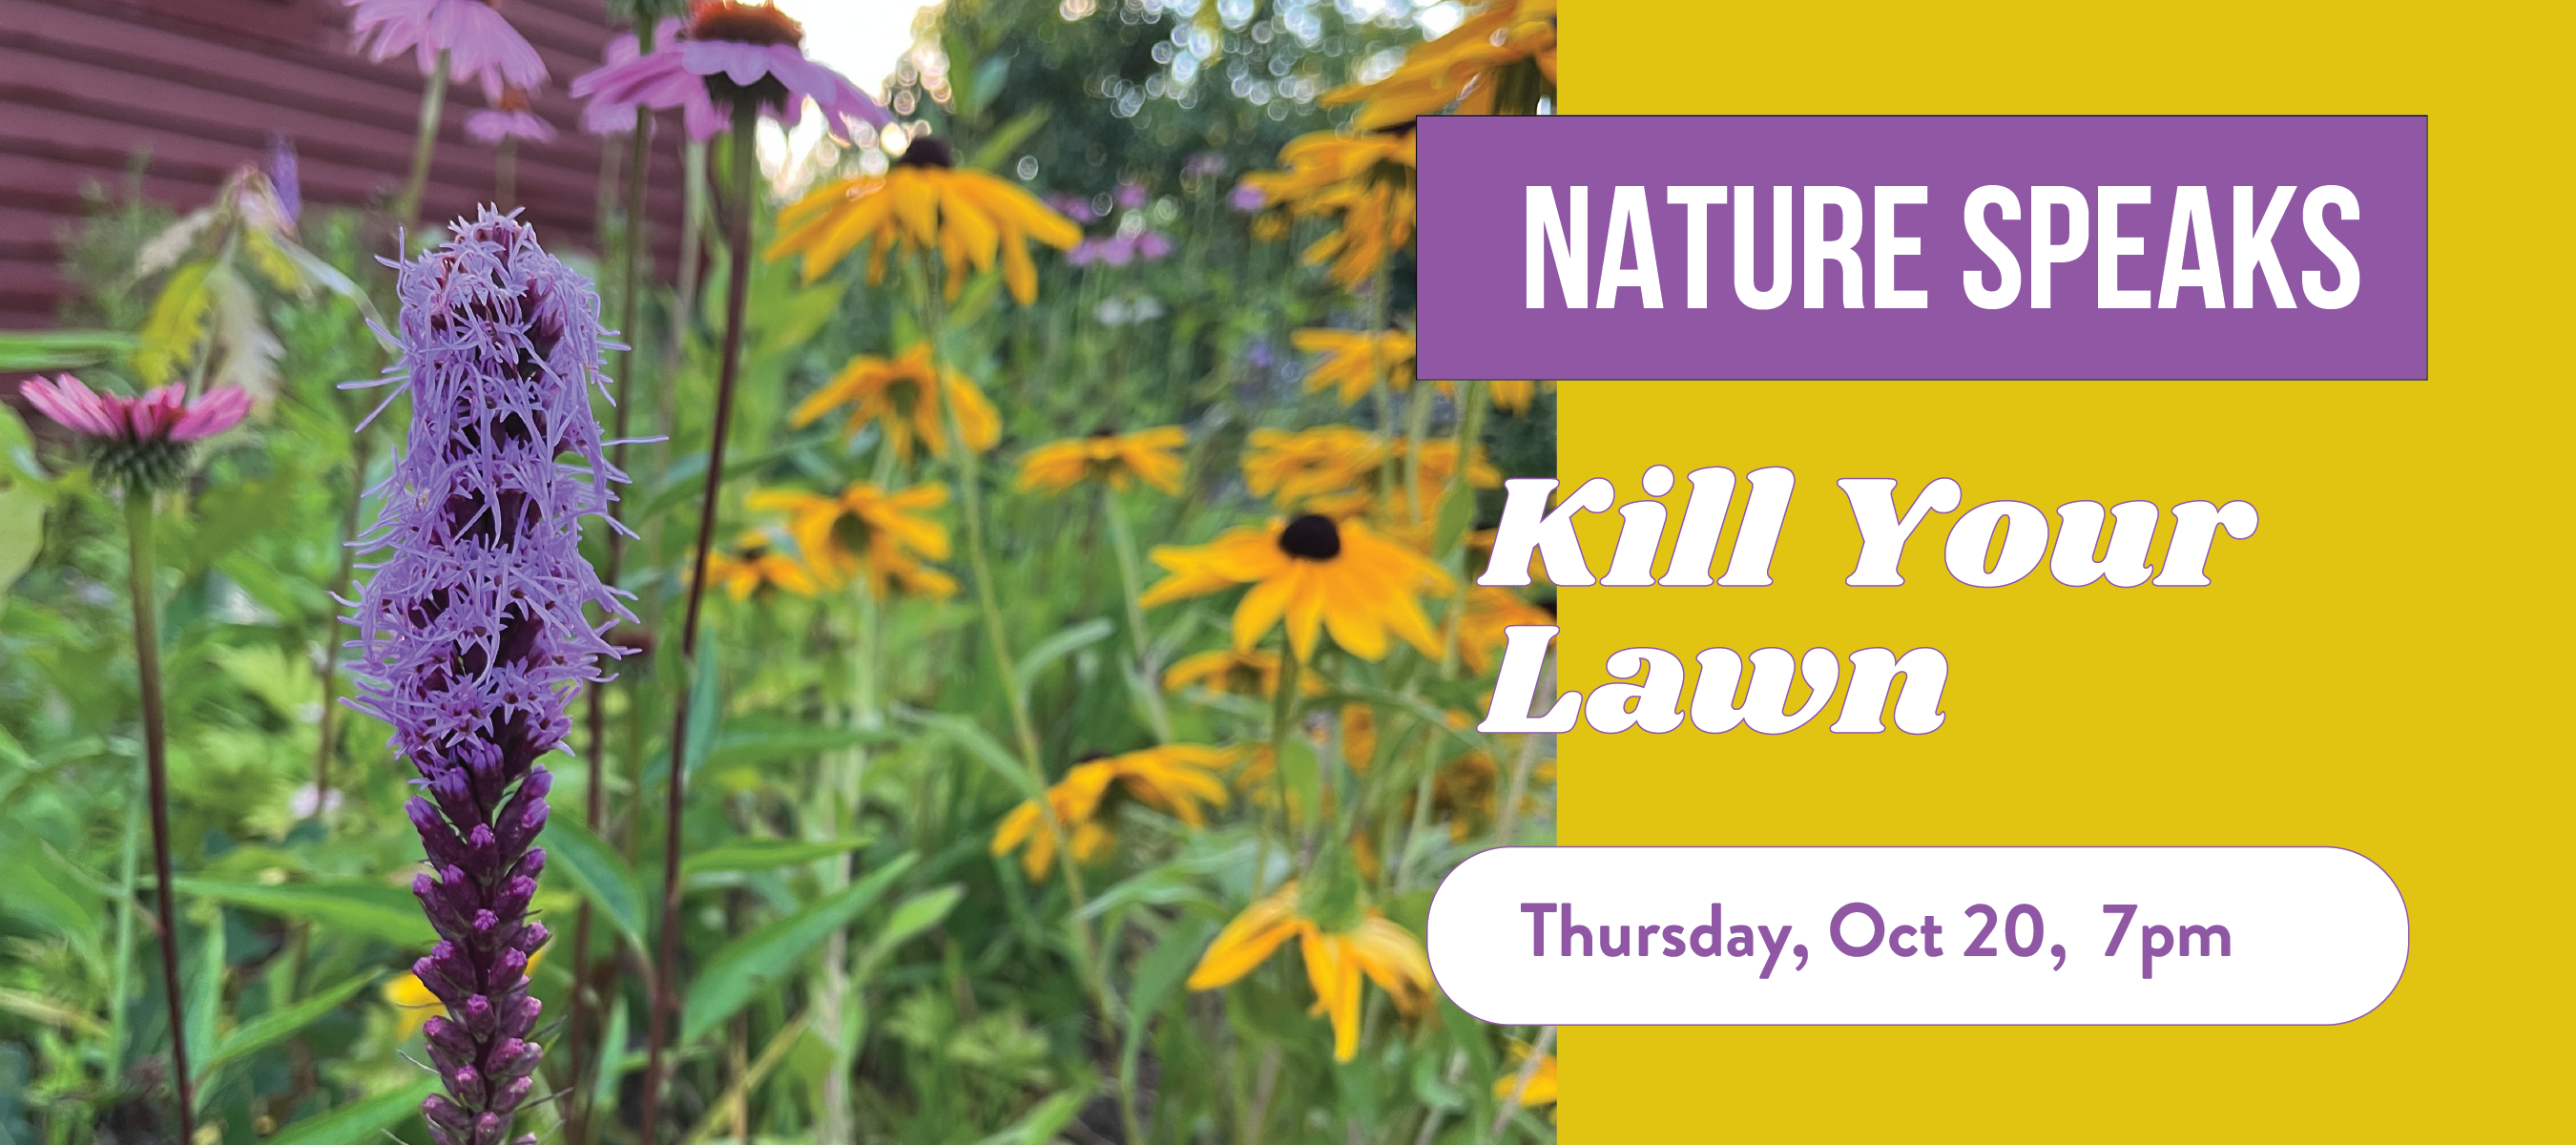 Nature Speaks, Kill Your Lawn, Prospect Heights, Lawn Care